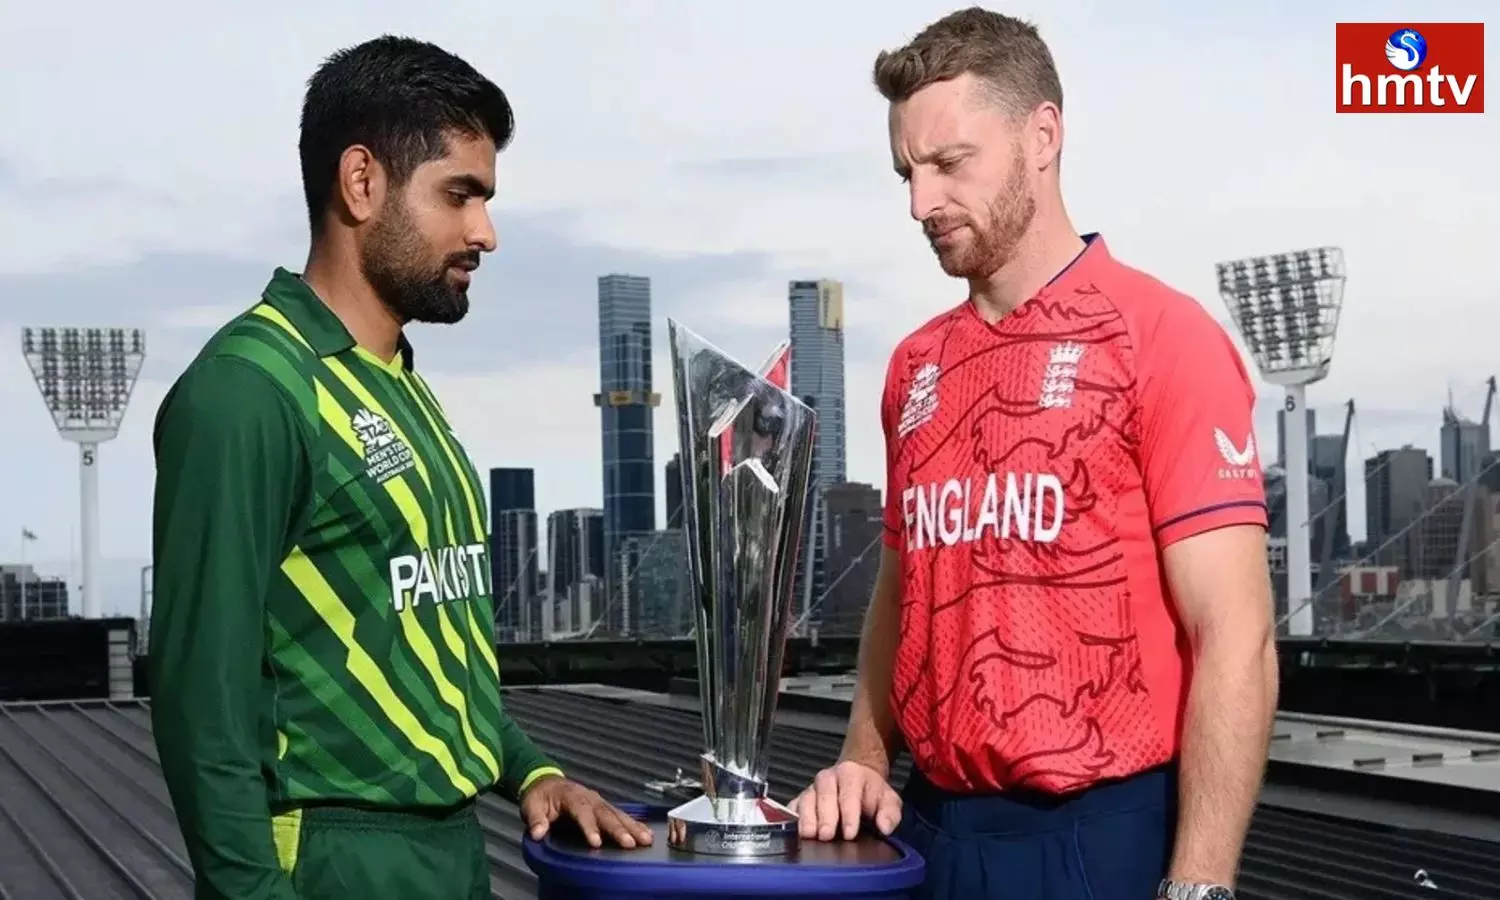 England will face Pakistan in the final